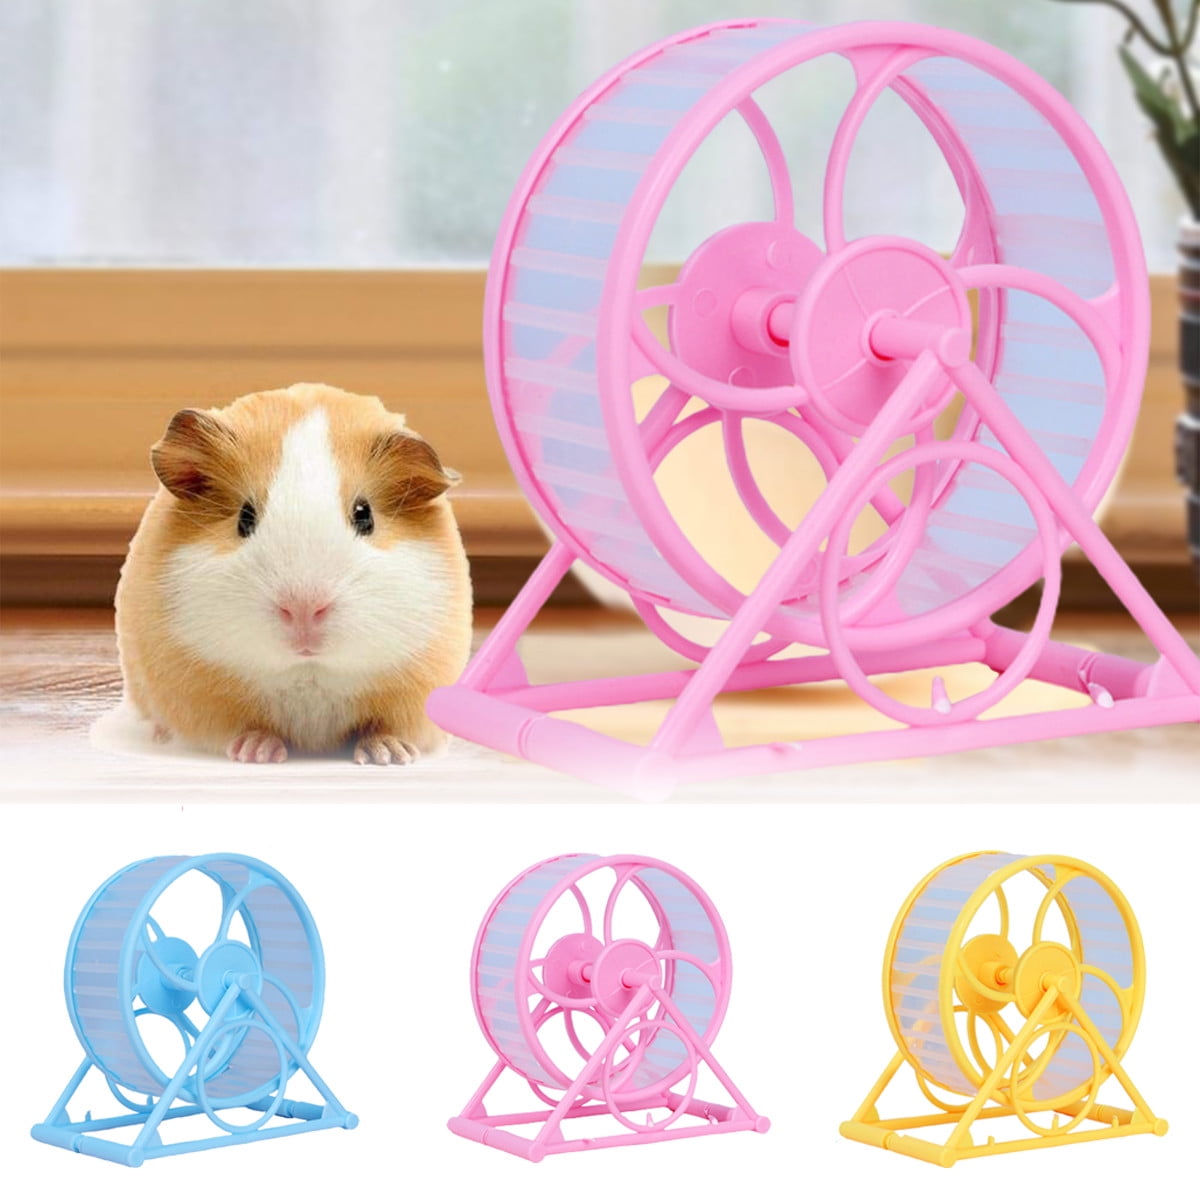 andy cool Hamster Running Spinner Sports Wheel Exercise Toy Animal Plastic Silent Jogging Wheel Running Wheels for Hamsters Mouse Guinea Pig 